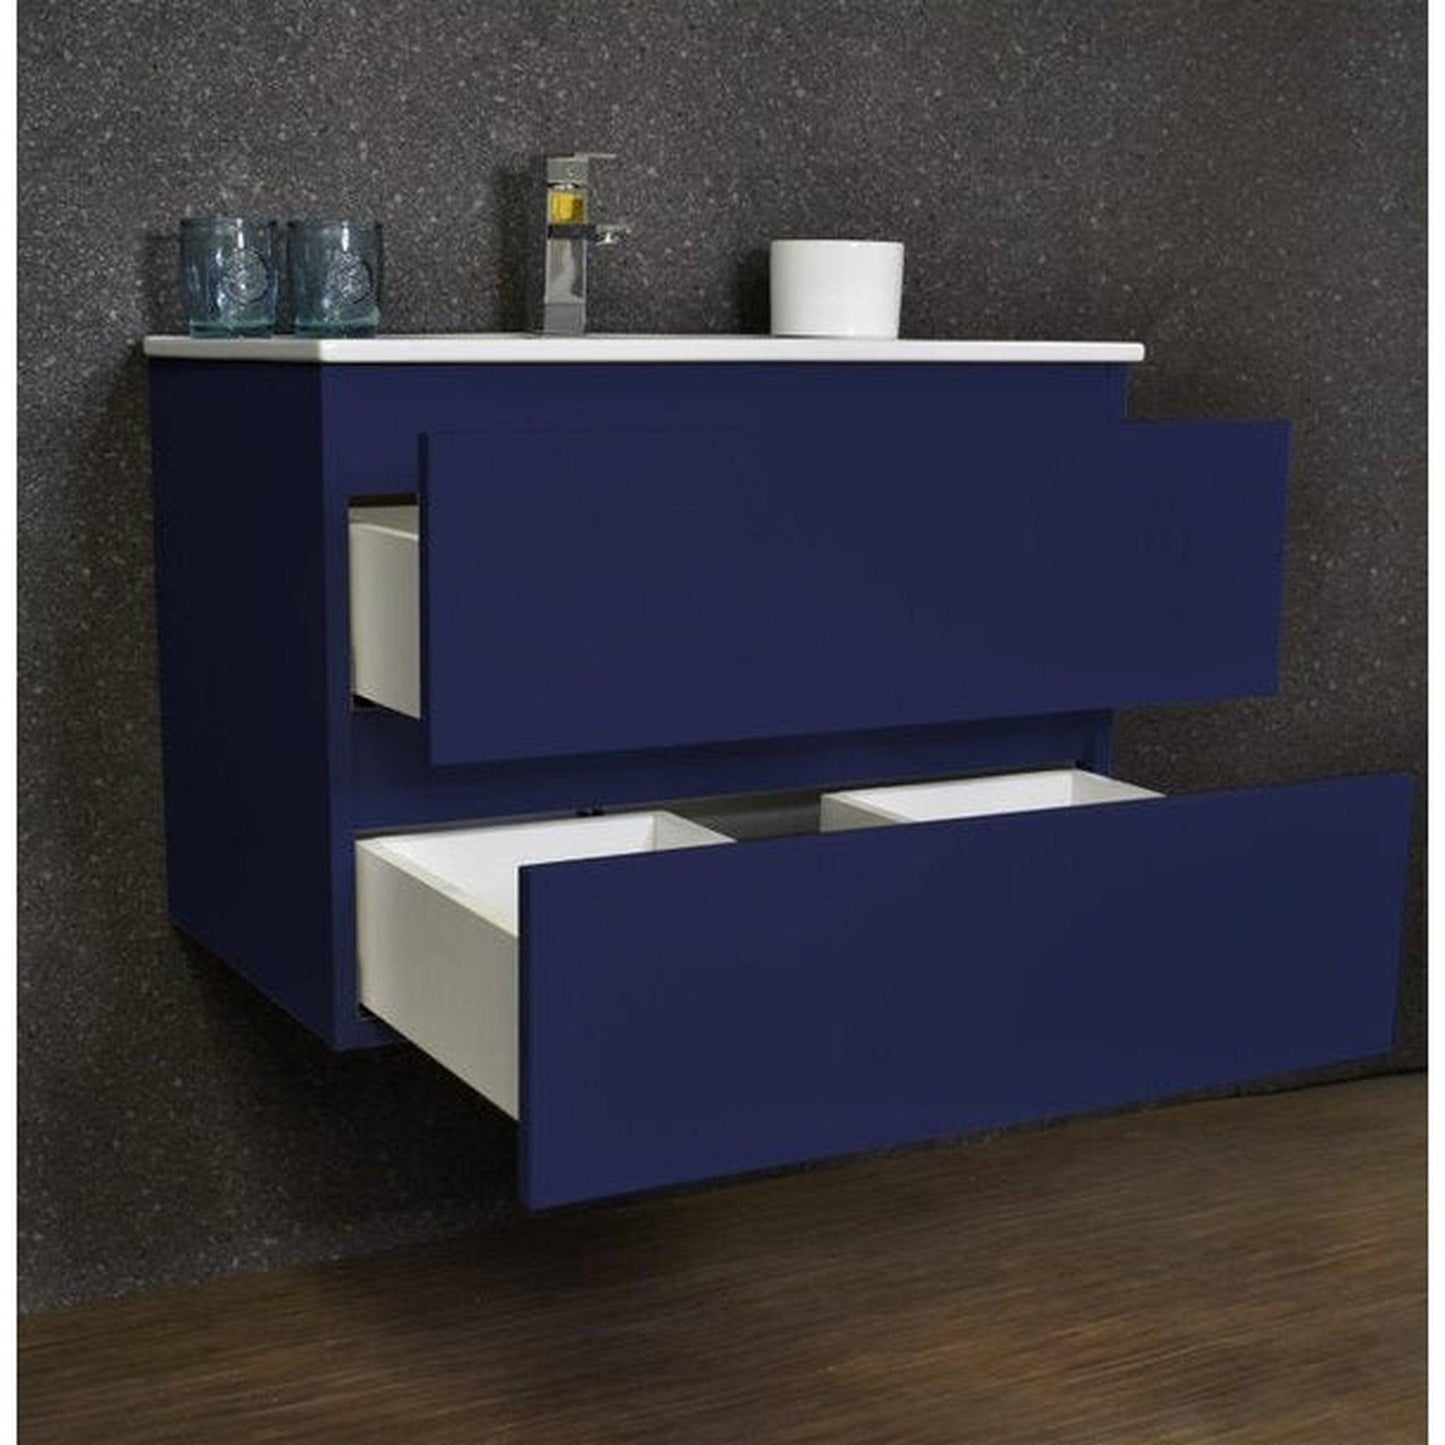 Volpa USA Salt 30" x 18" Navy Wall-Mounted Floating Bathroom Vanity With Drawers, Integrated Porcelain Ceramic Top and Integrated Ceramic Sink